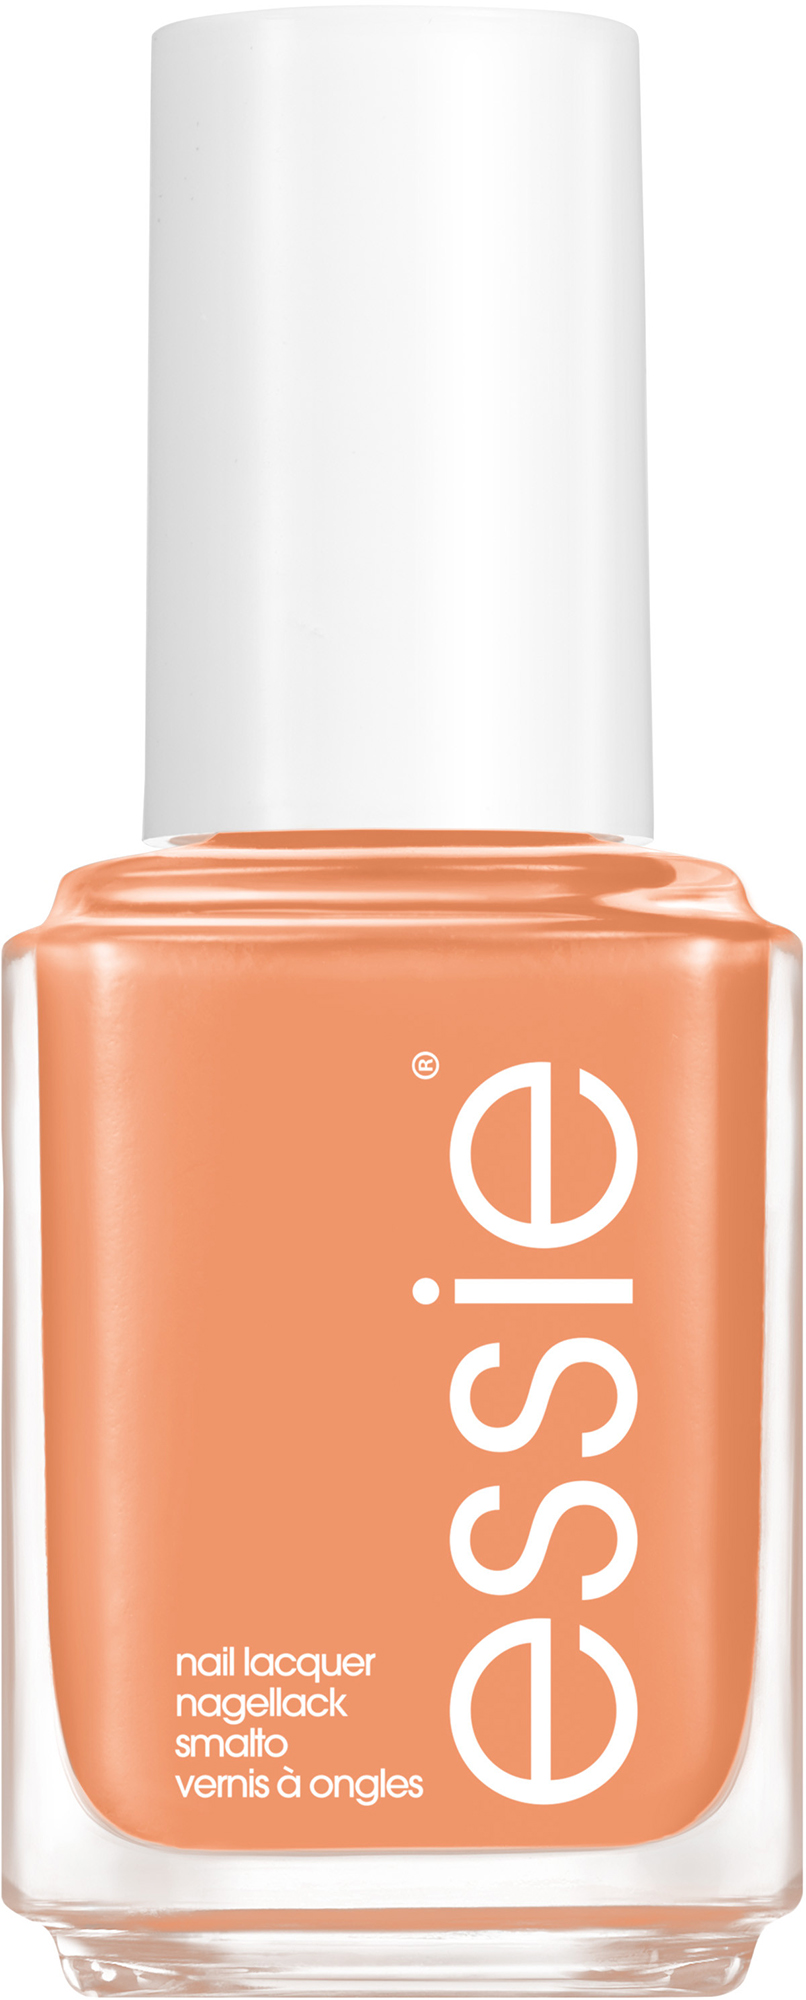 Coconuts Nail Essie You Lacquer For 843 Summer Collection